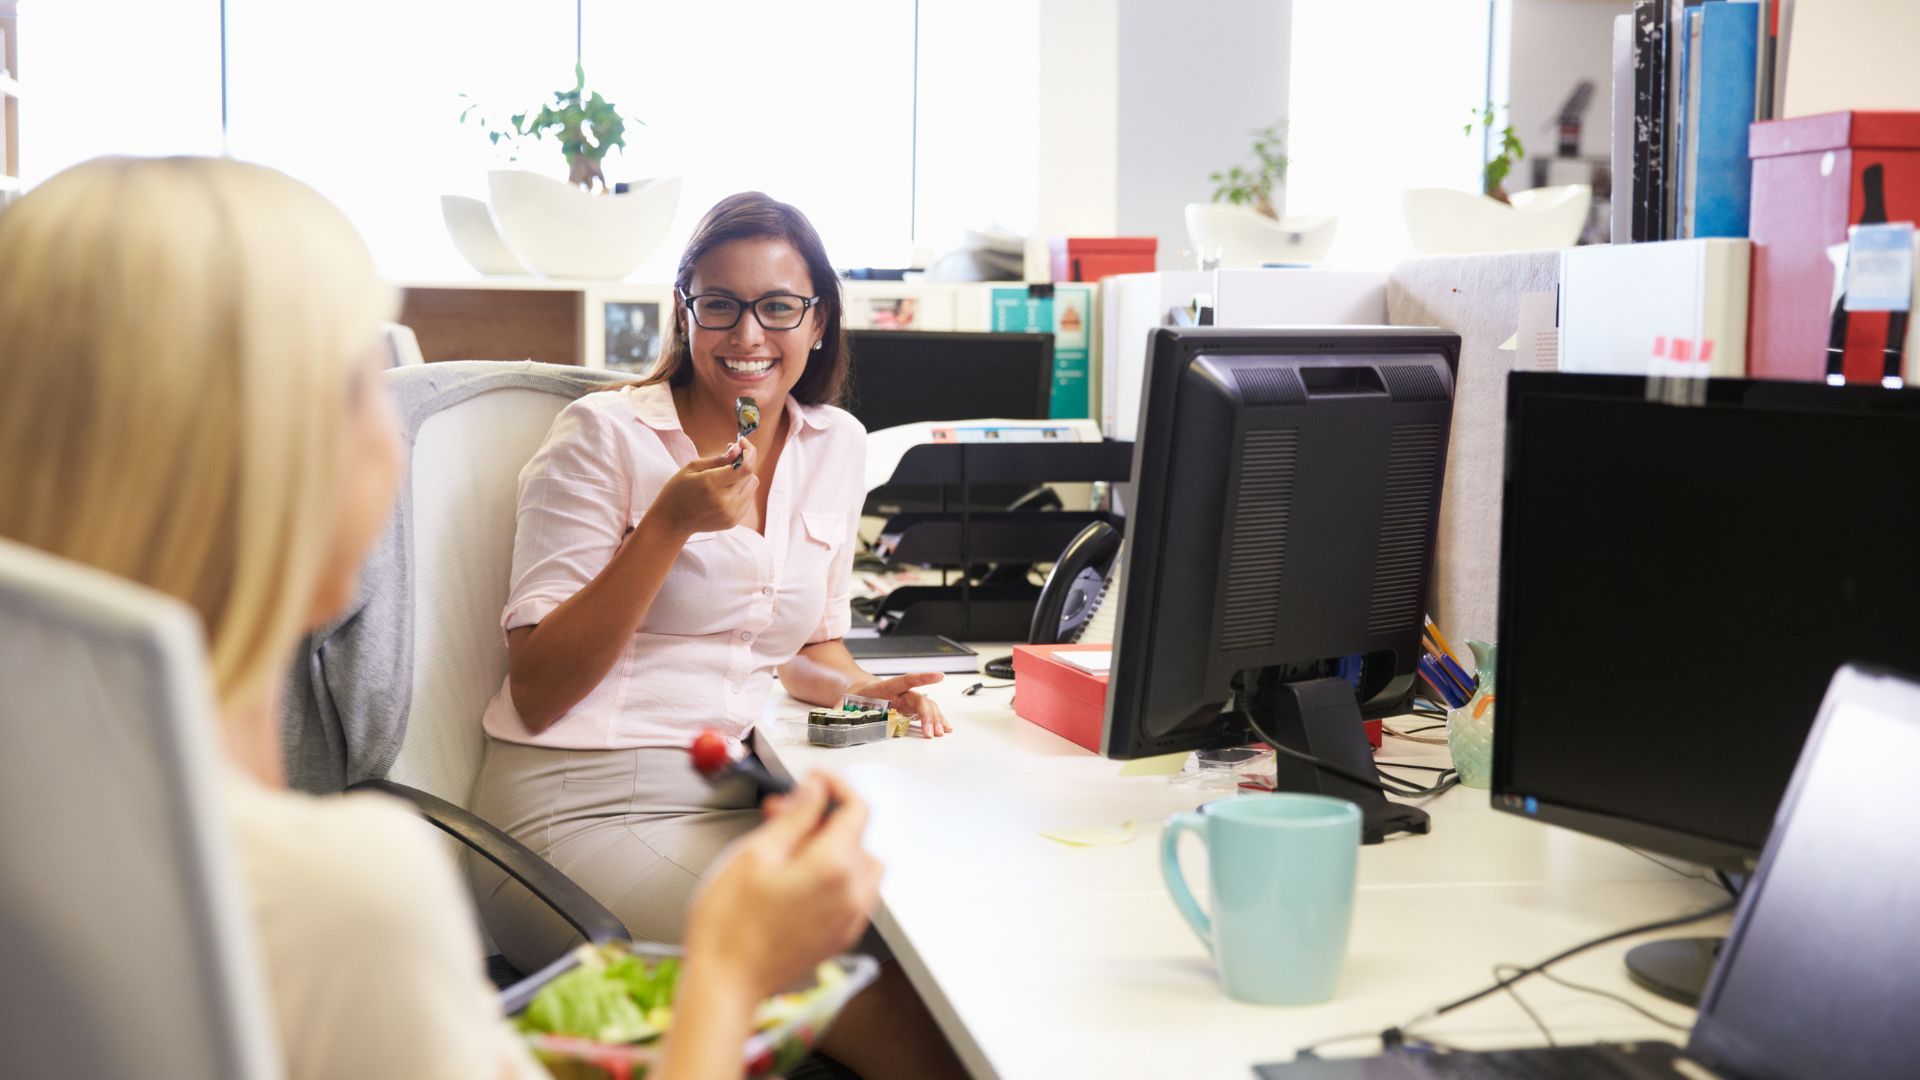 two women eating at work